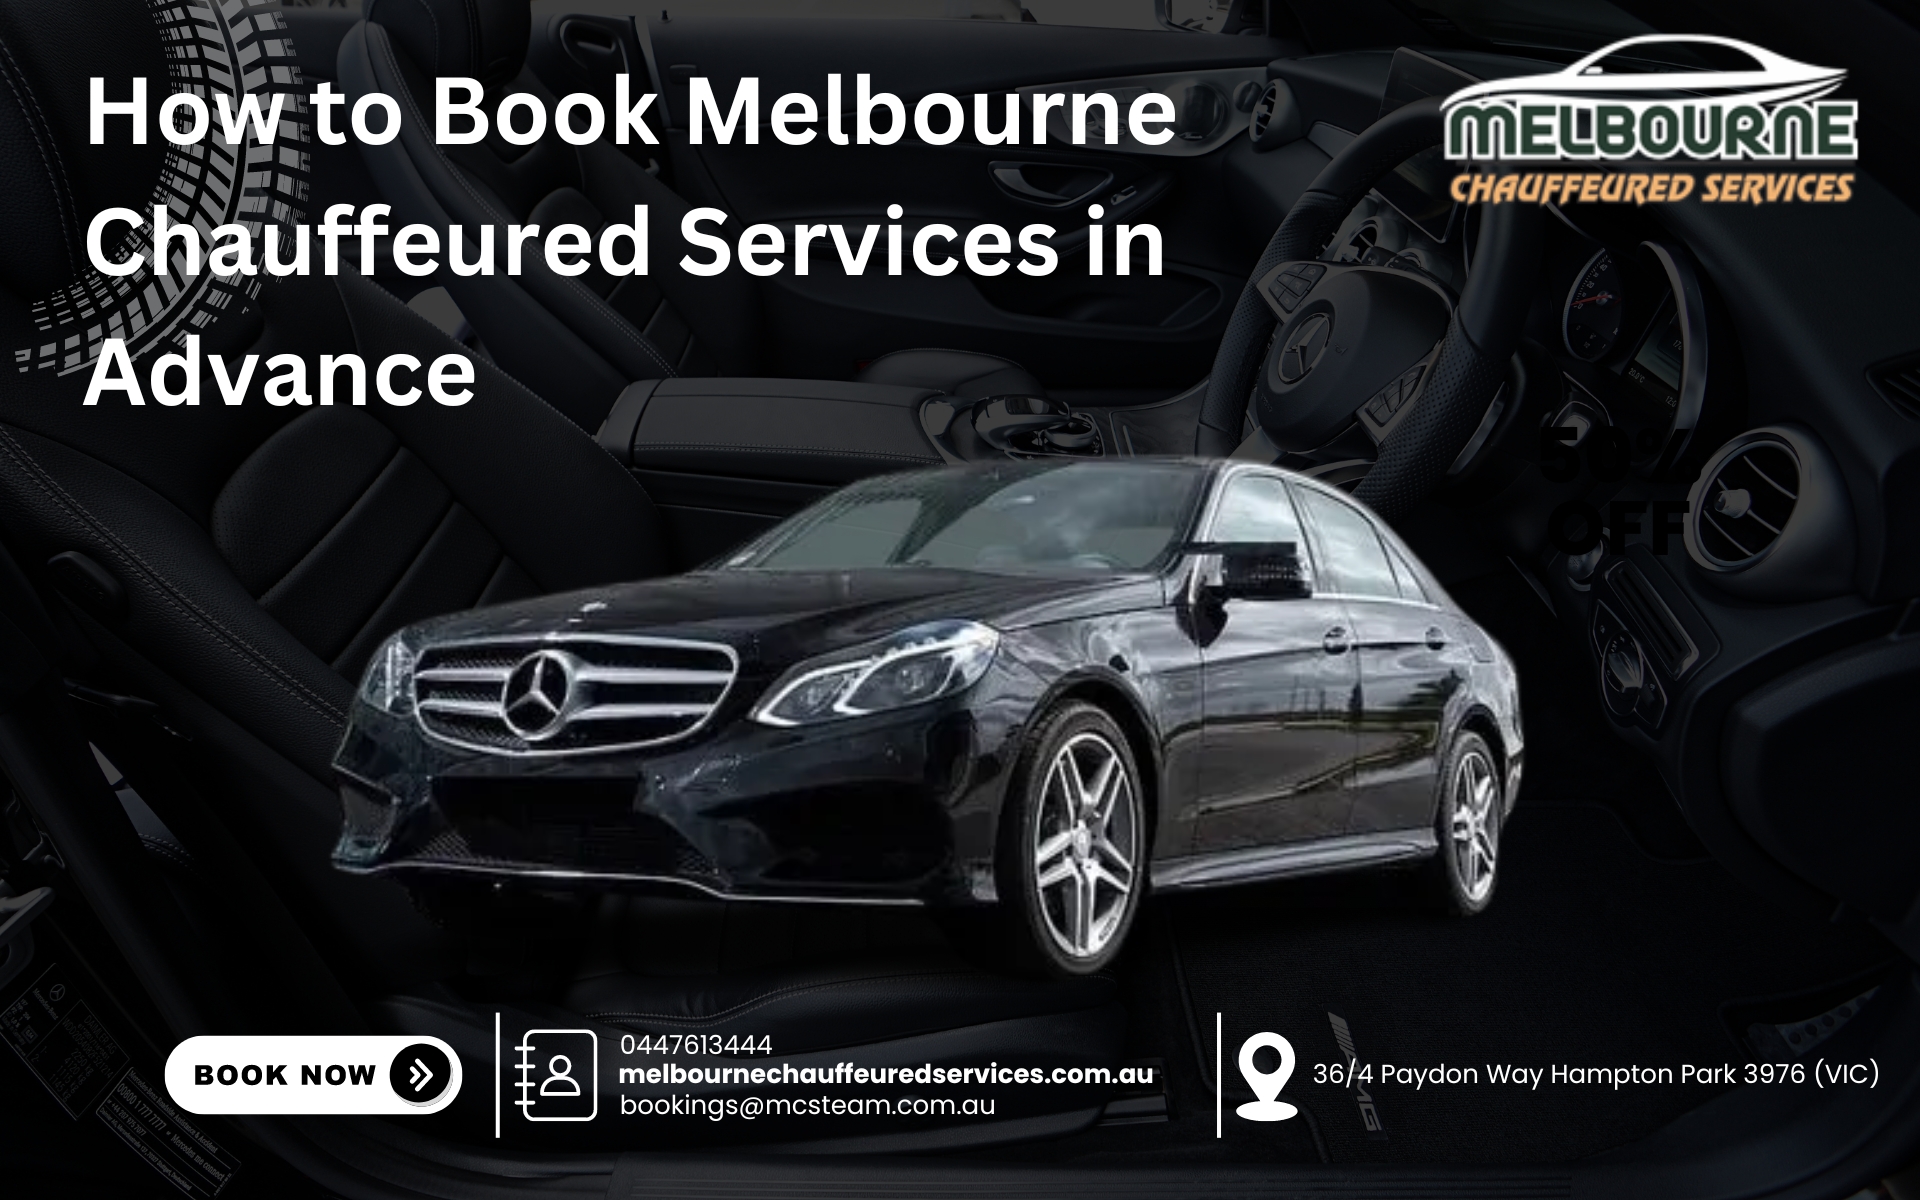 Melbourne Chauffeured Services